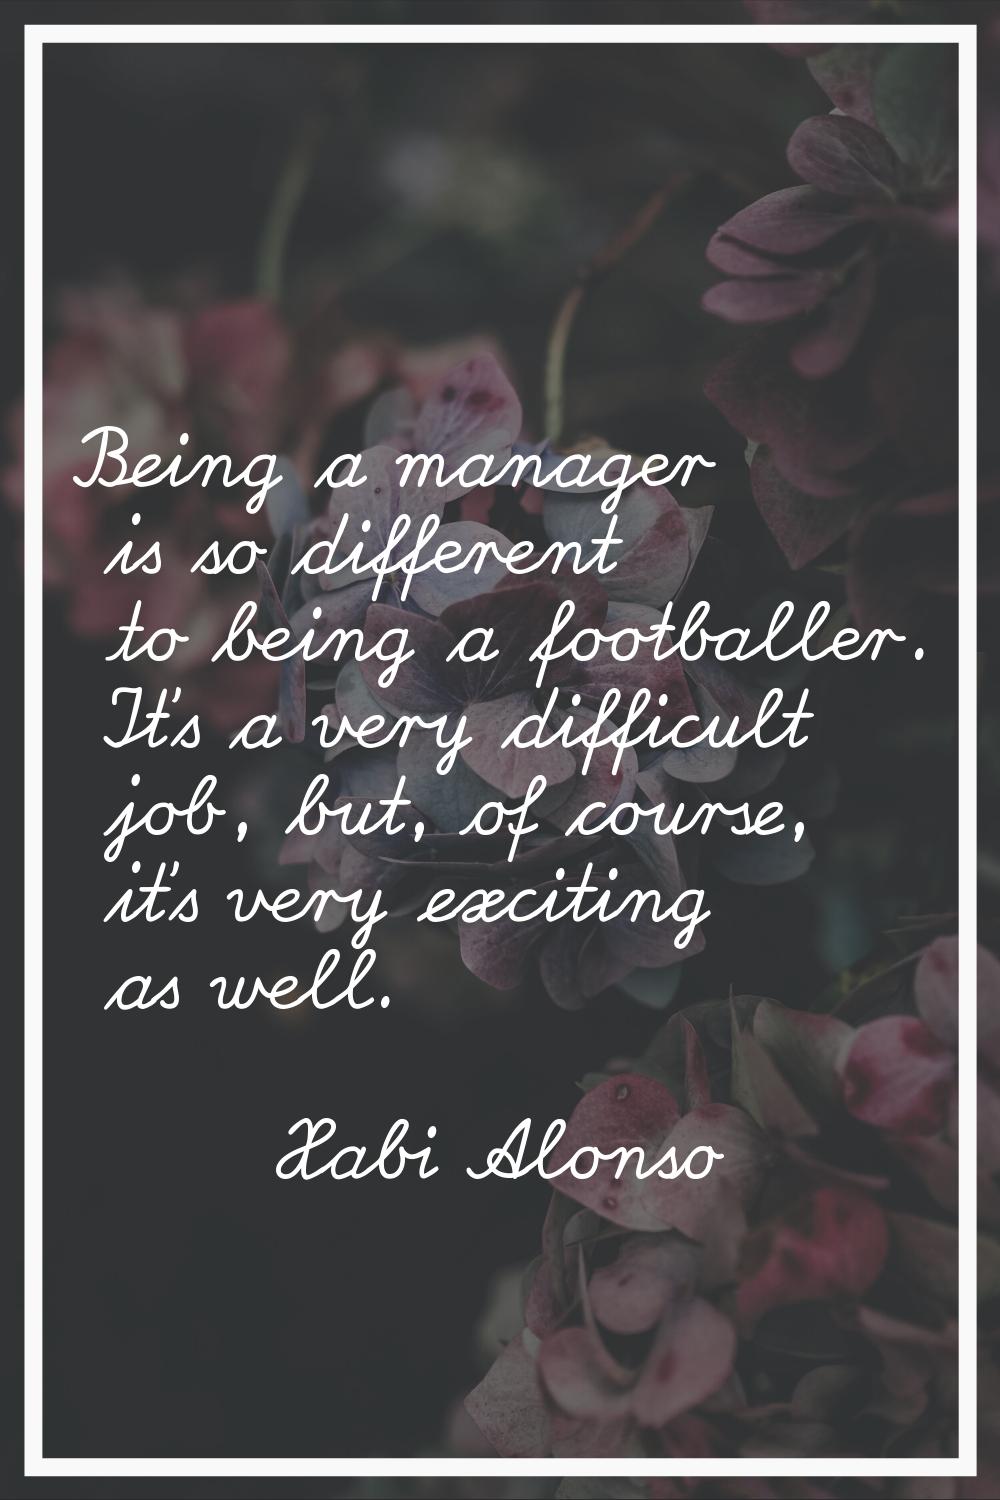 Being a manager is so different to being a footballer. It's a very difficult job, but, of course, i